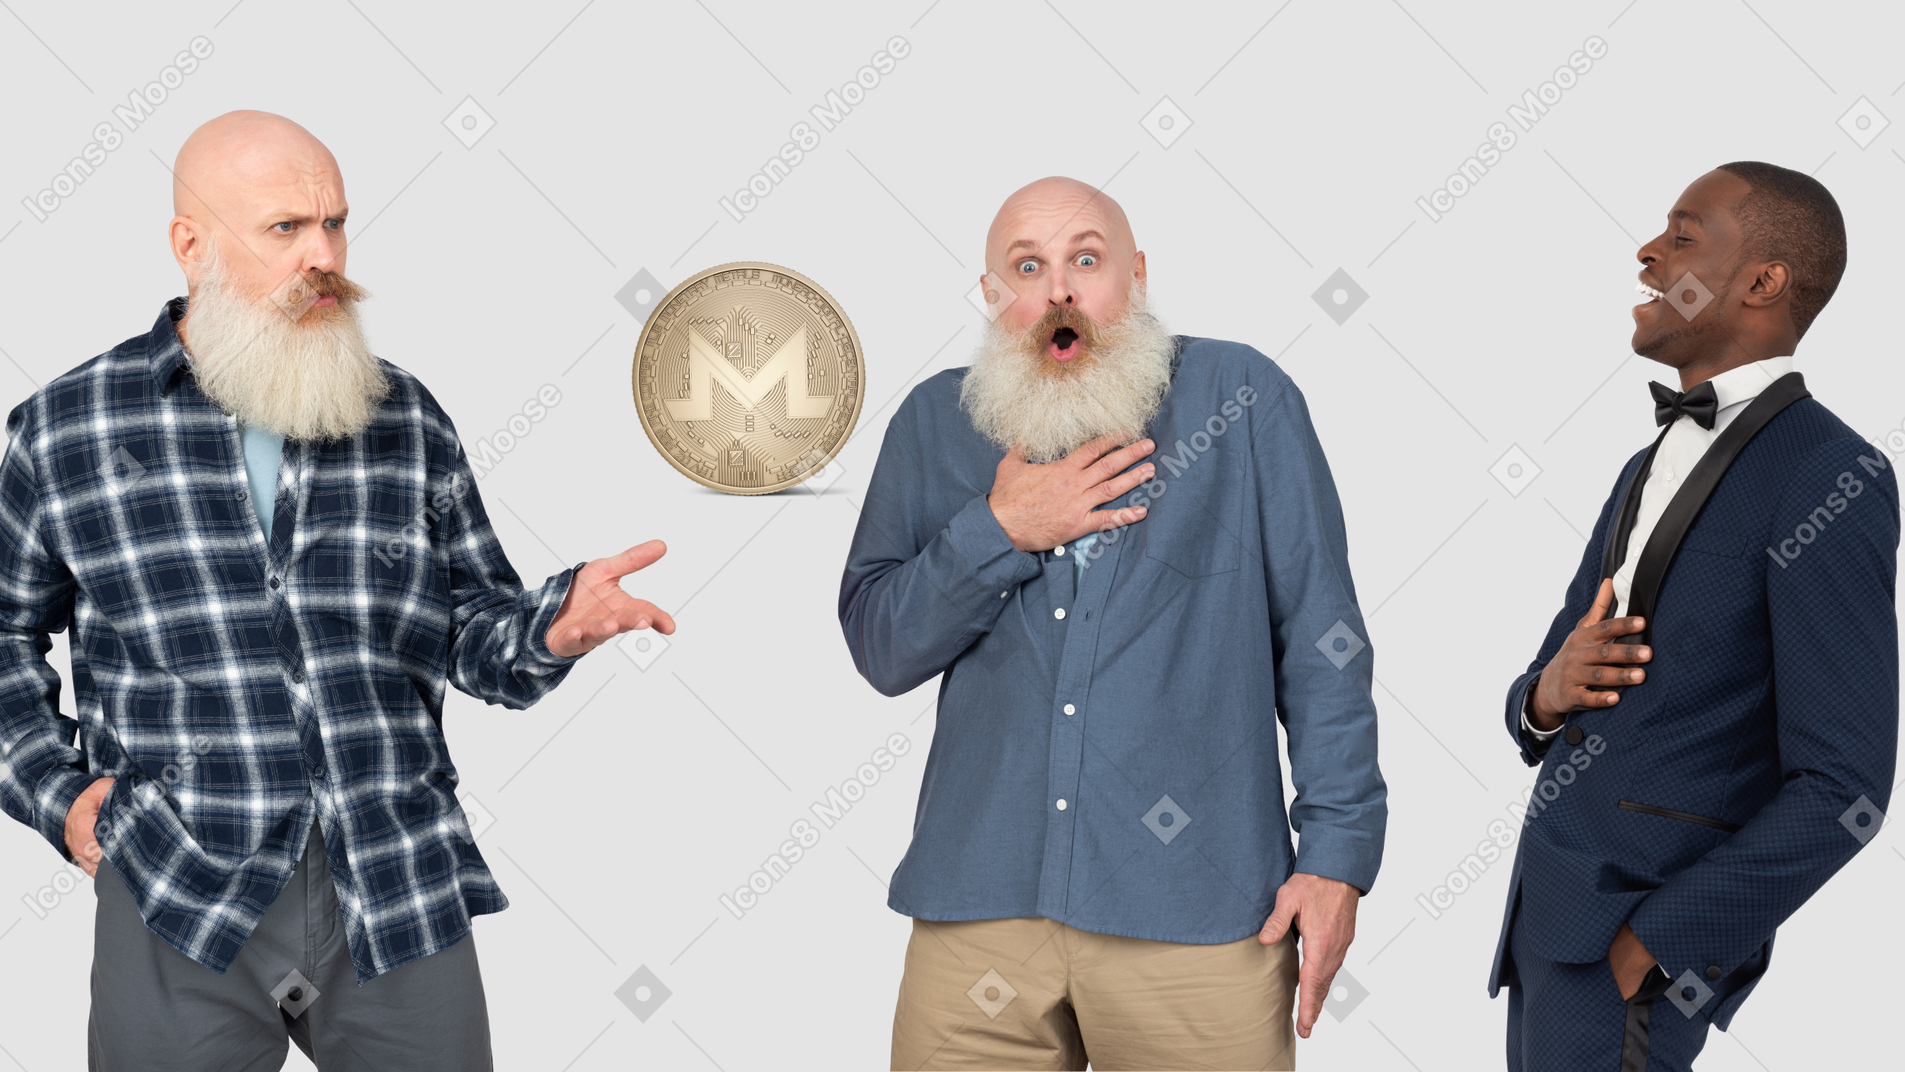 Men discussing cryptocurrency